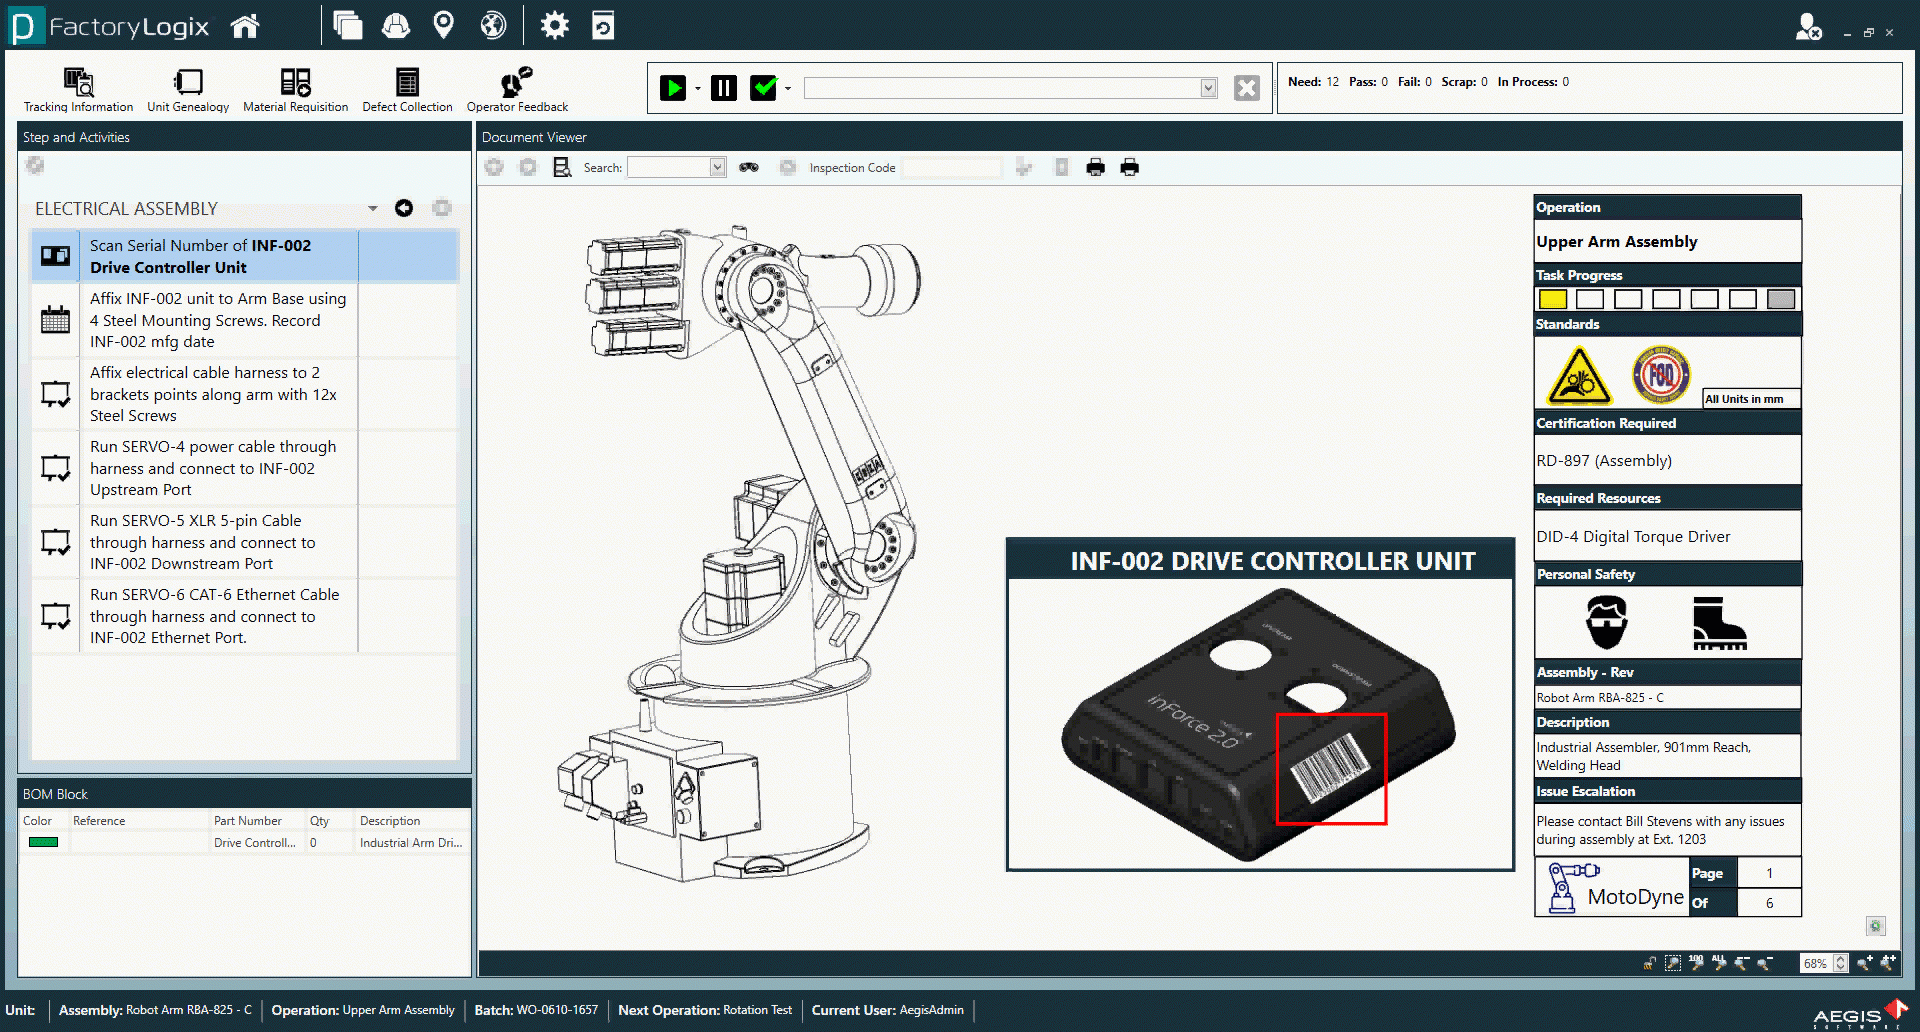 guided work instruction image in our manufacturing execution system